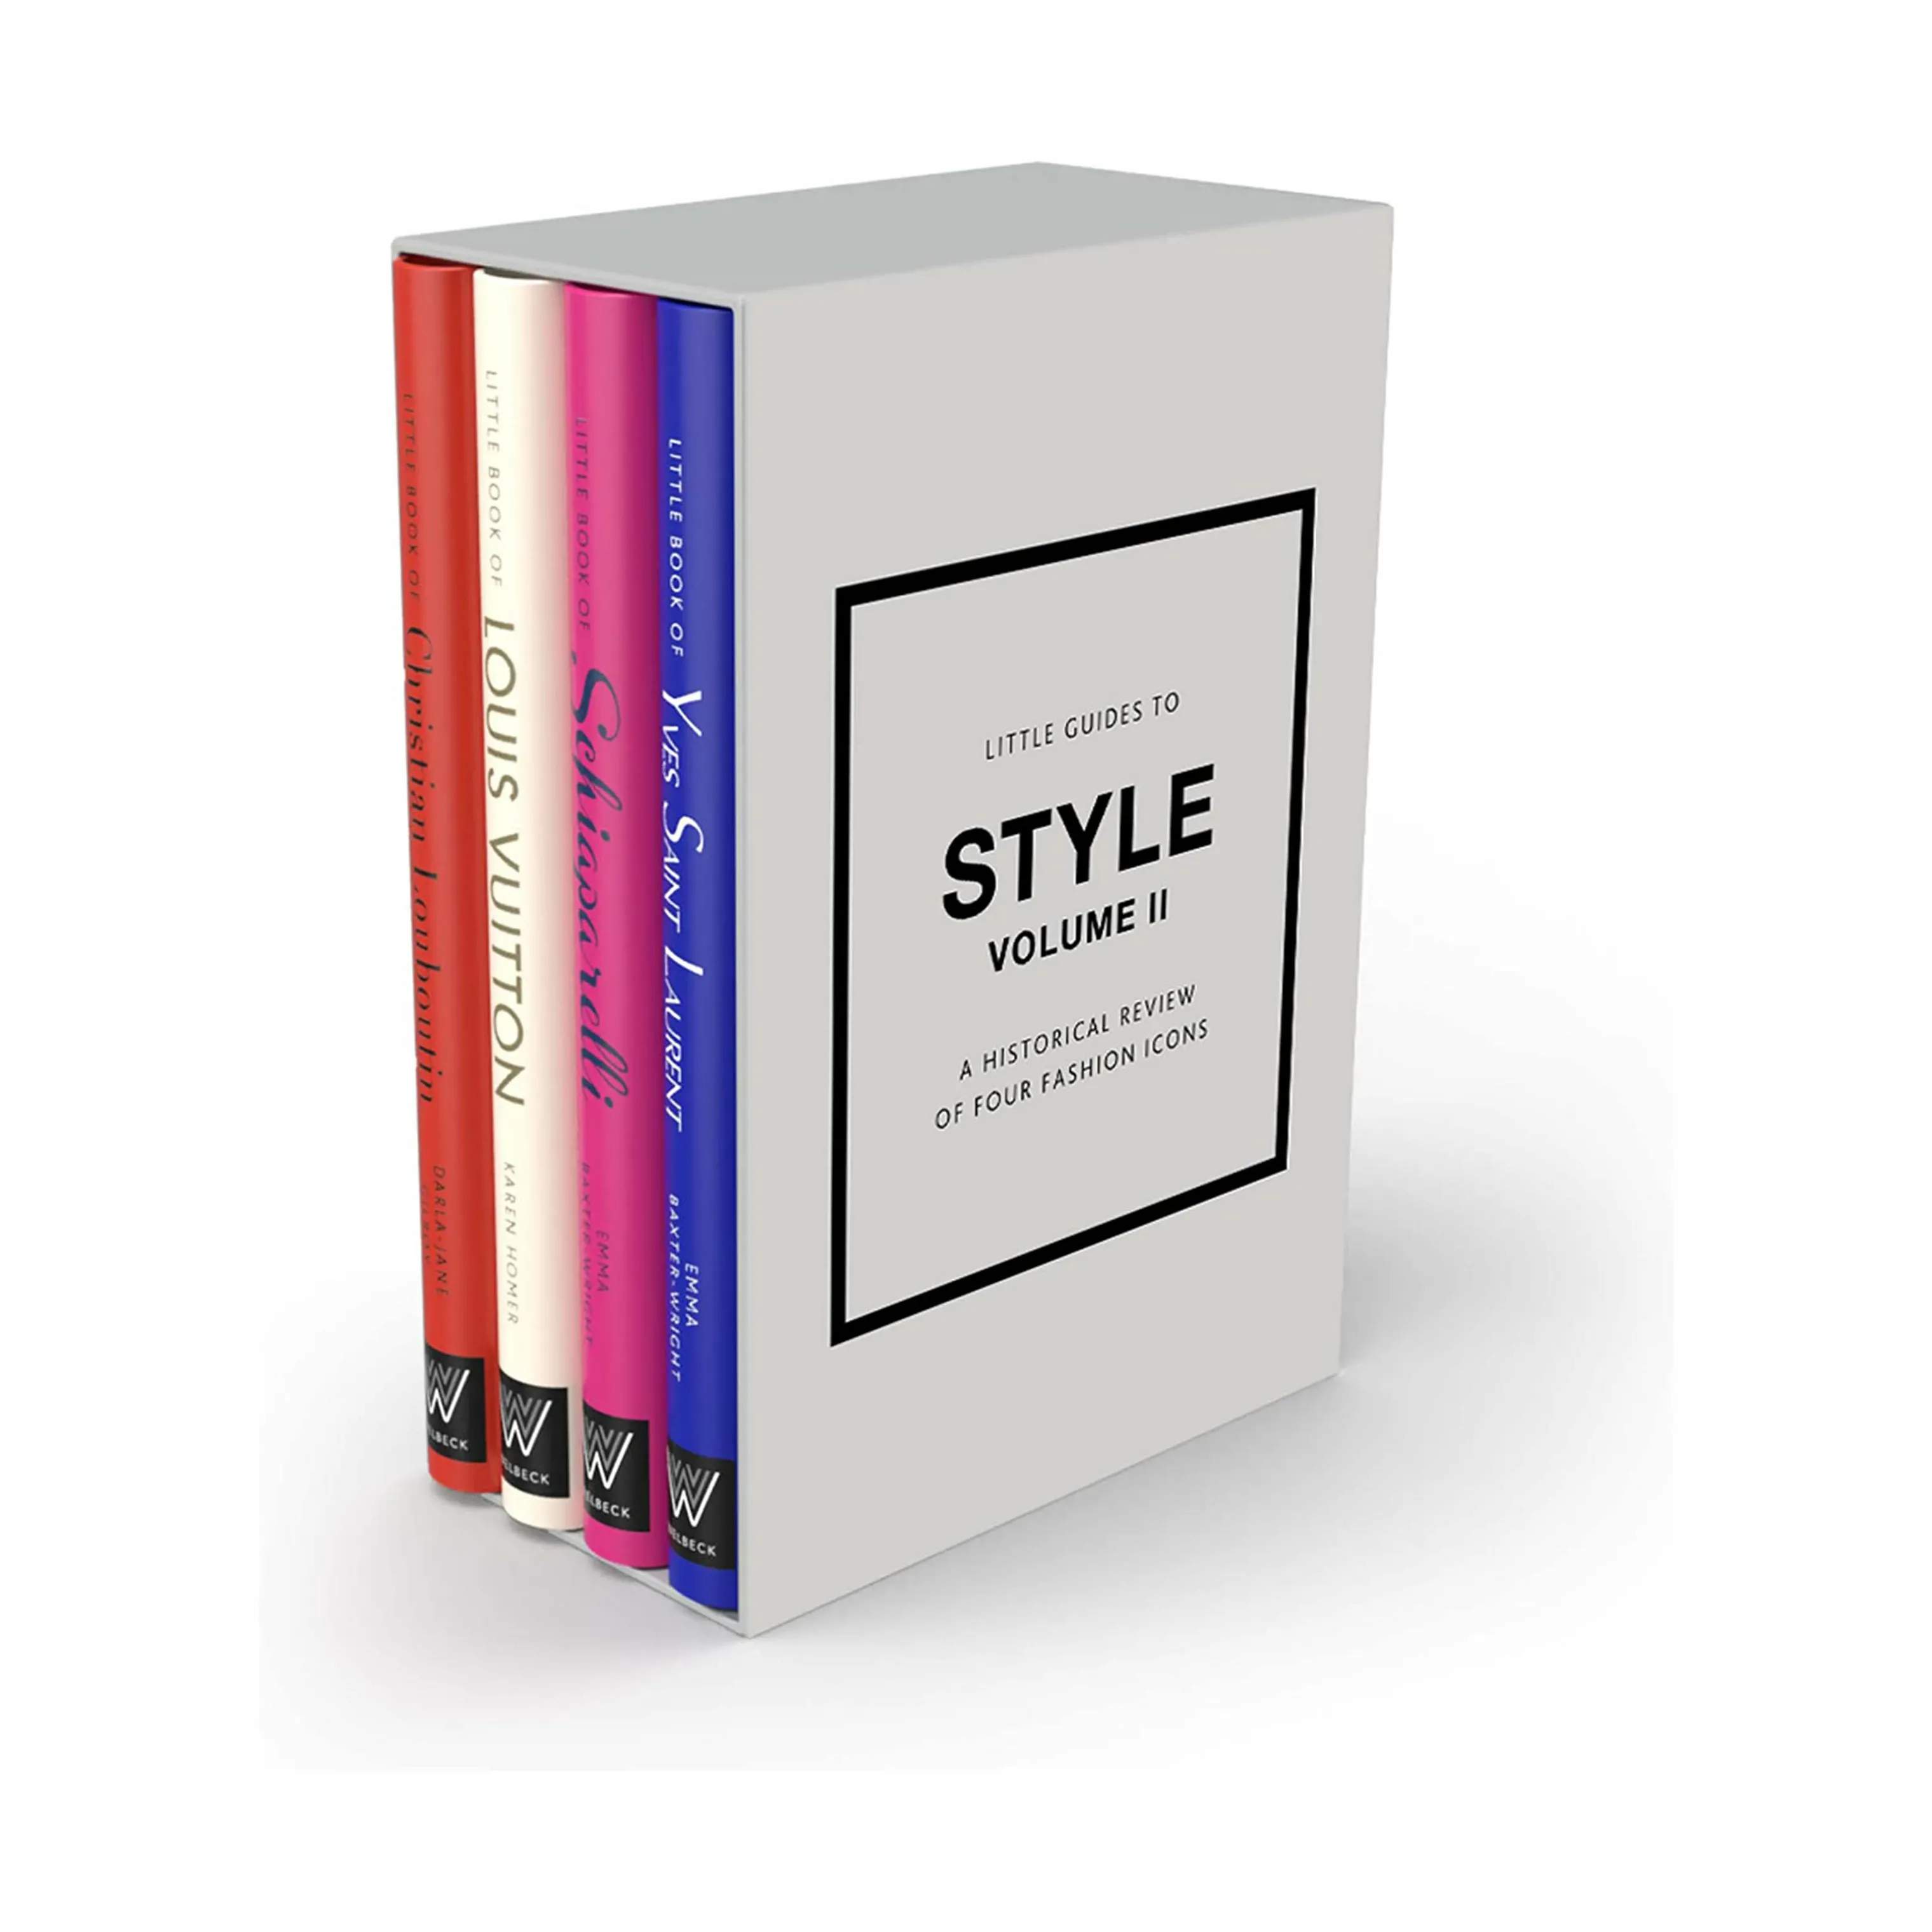 New Mags øvrige bøger Little Guides to Style Vol, II